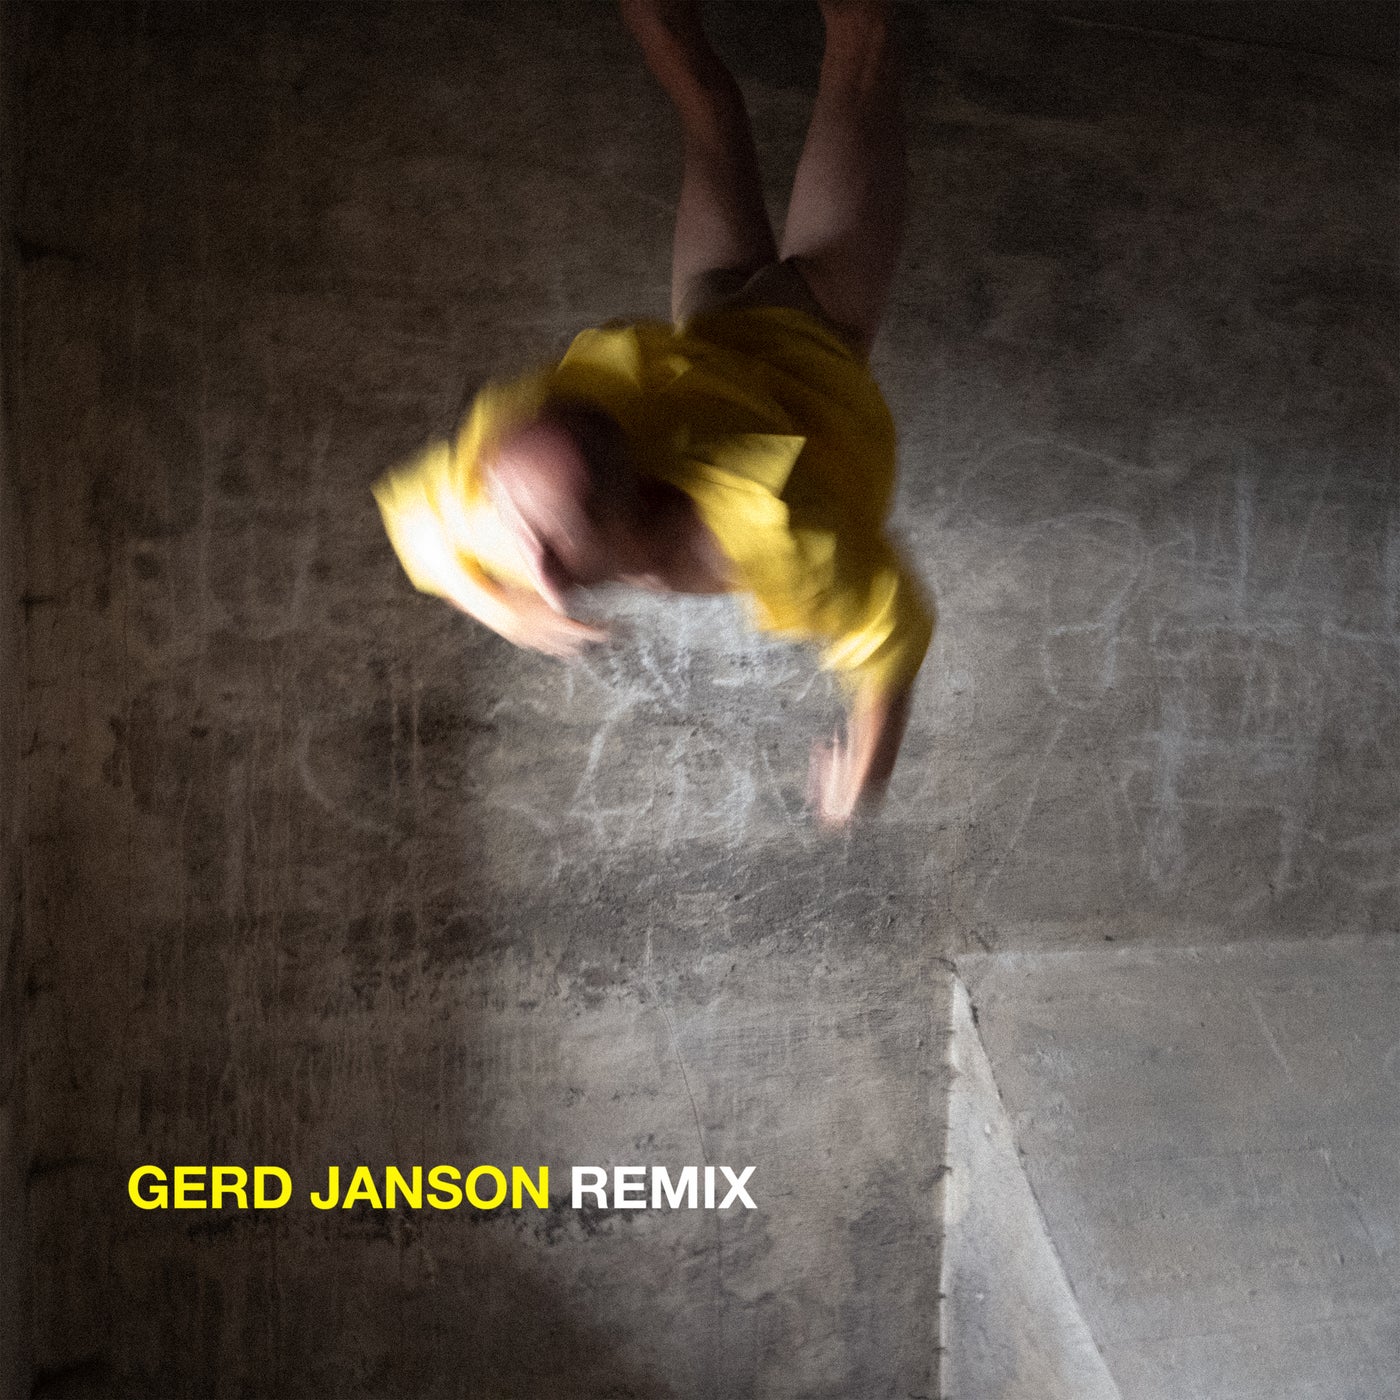 Who's Having the Greatest Time? (Gerd Janson Remix)